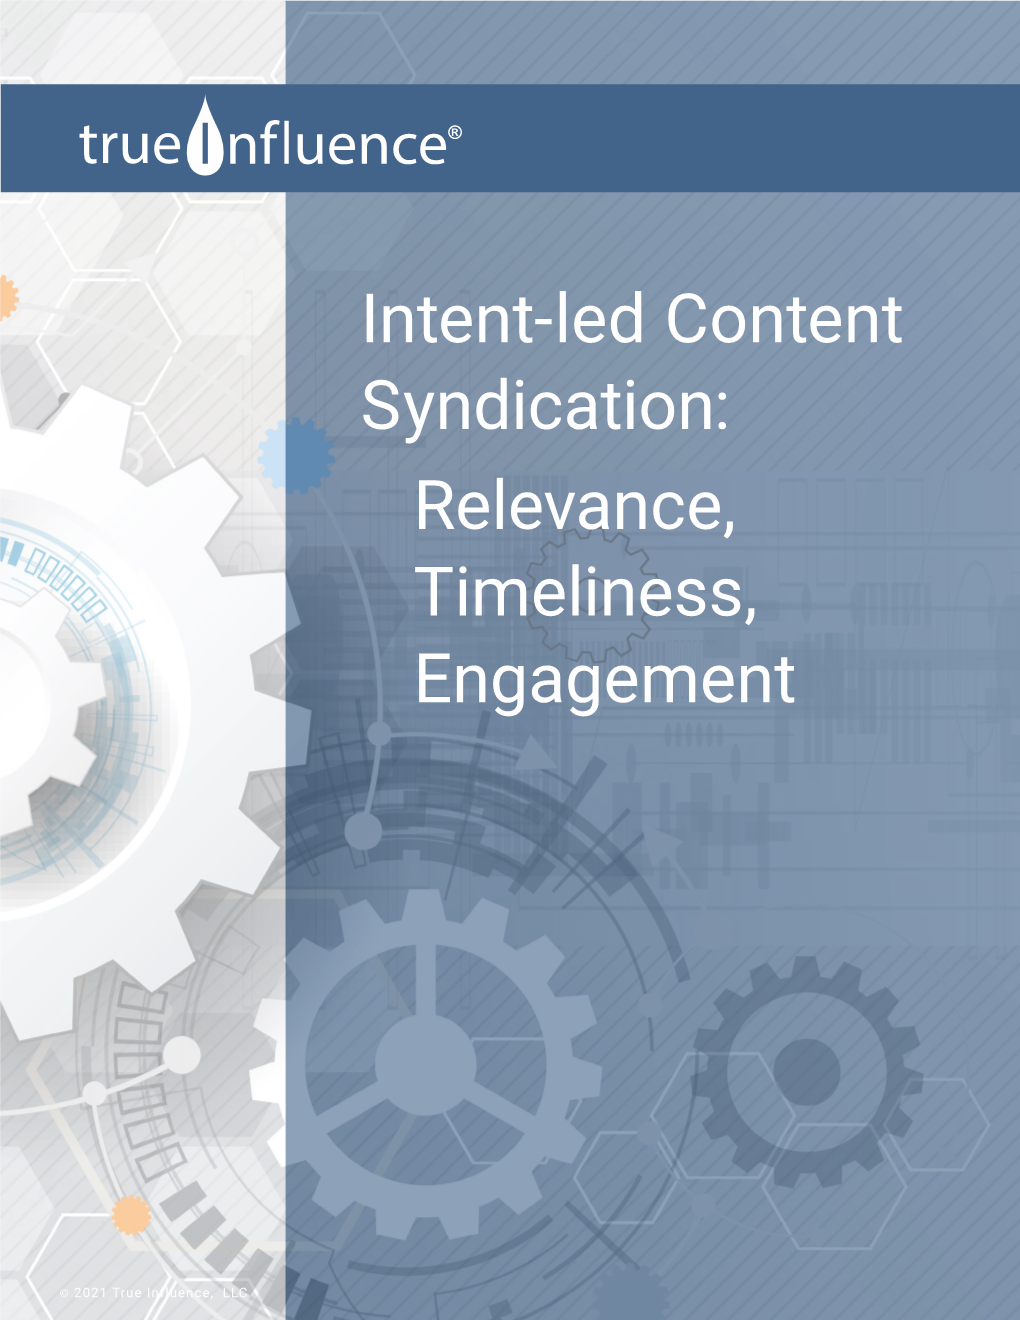 Intent-Led Content Syndication: Relevance, Timeliness, Engagement